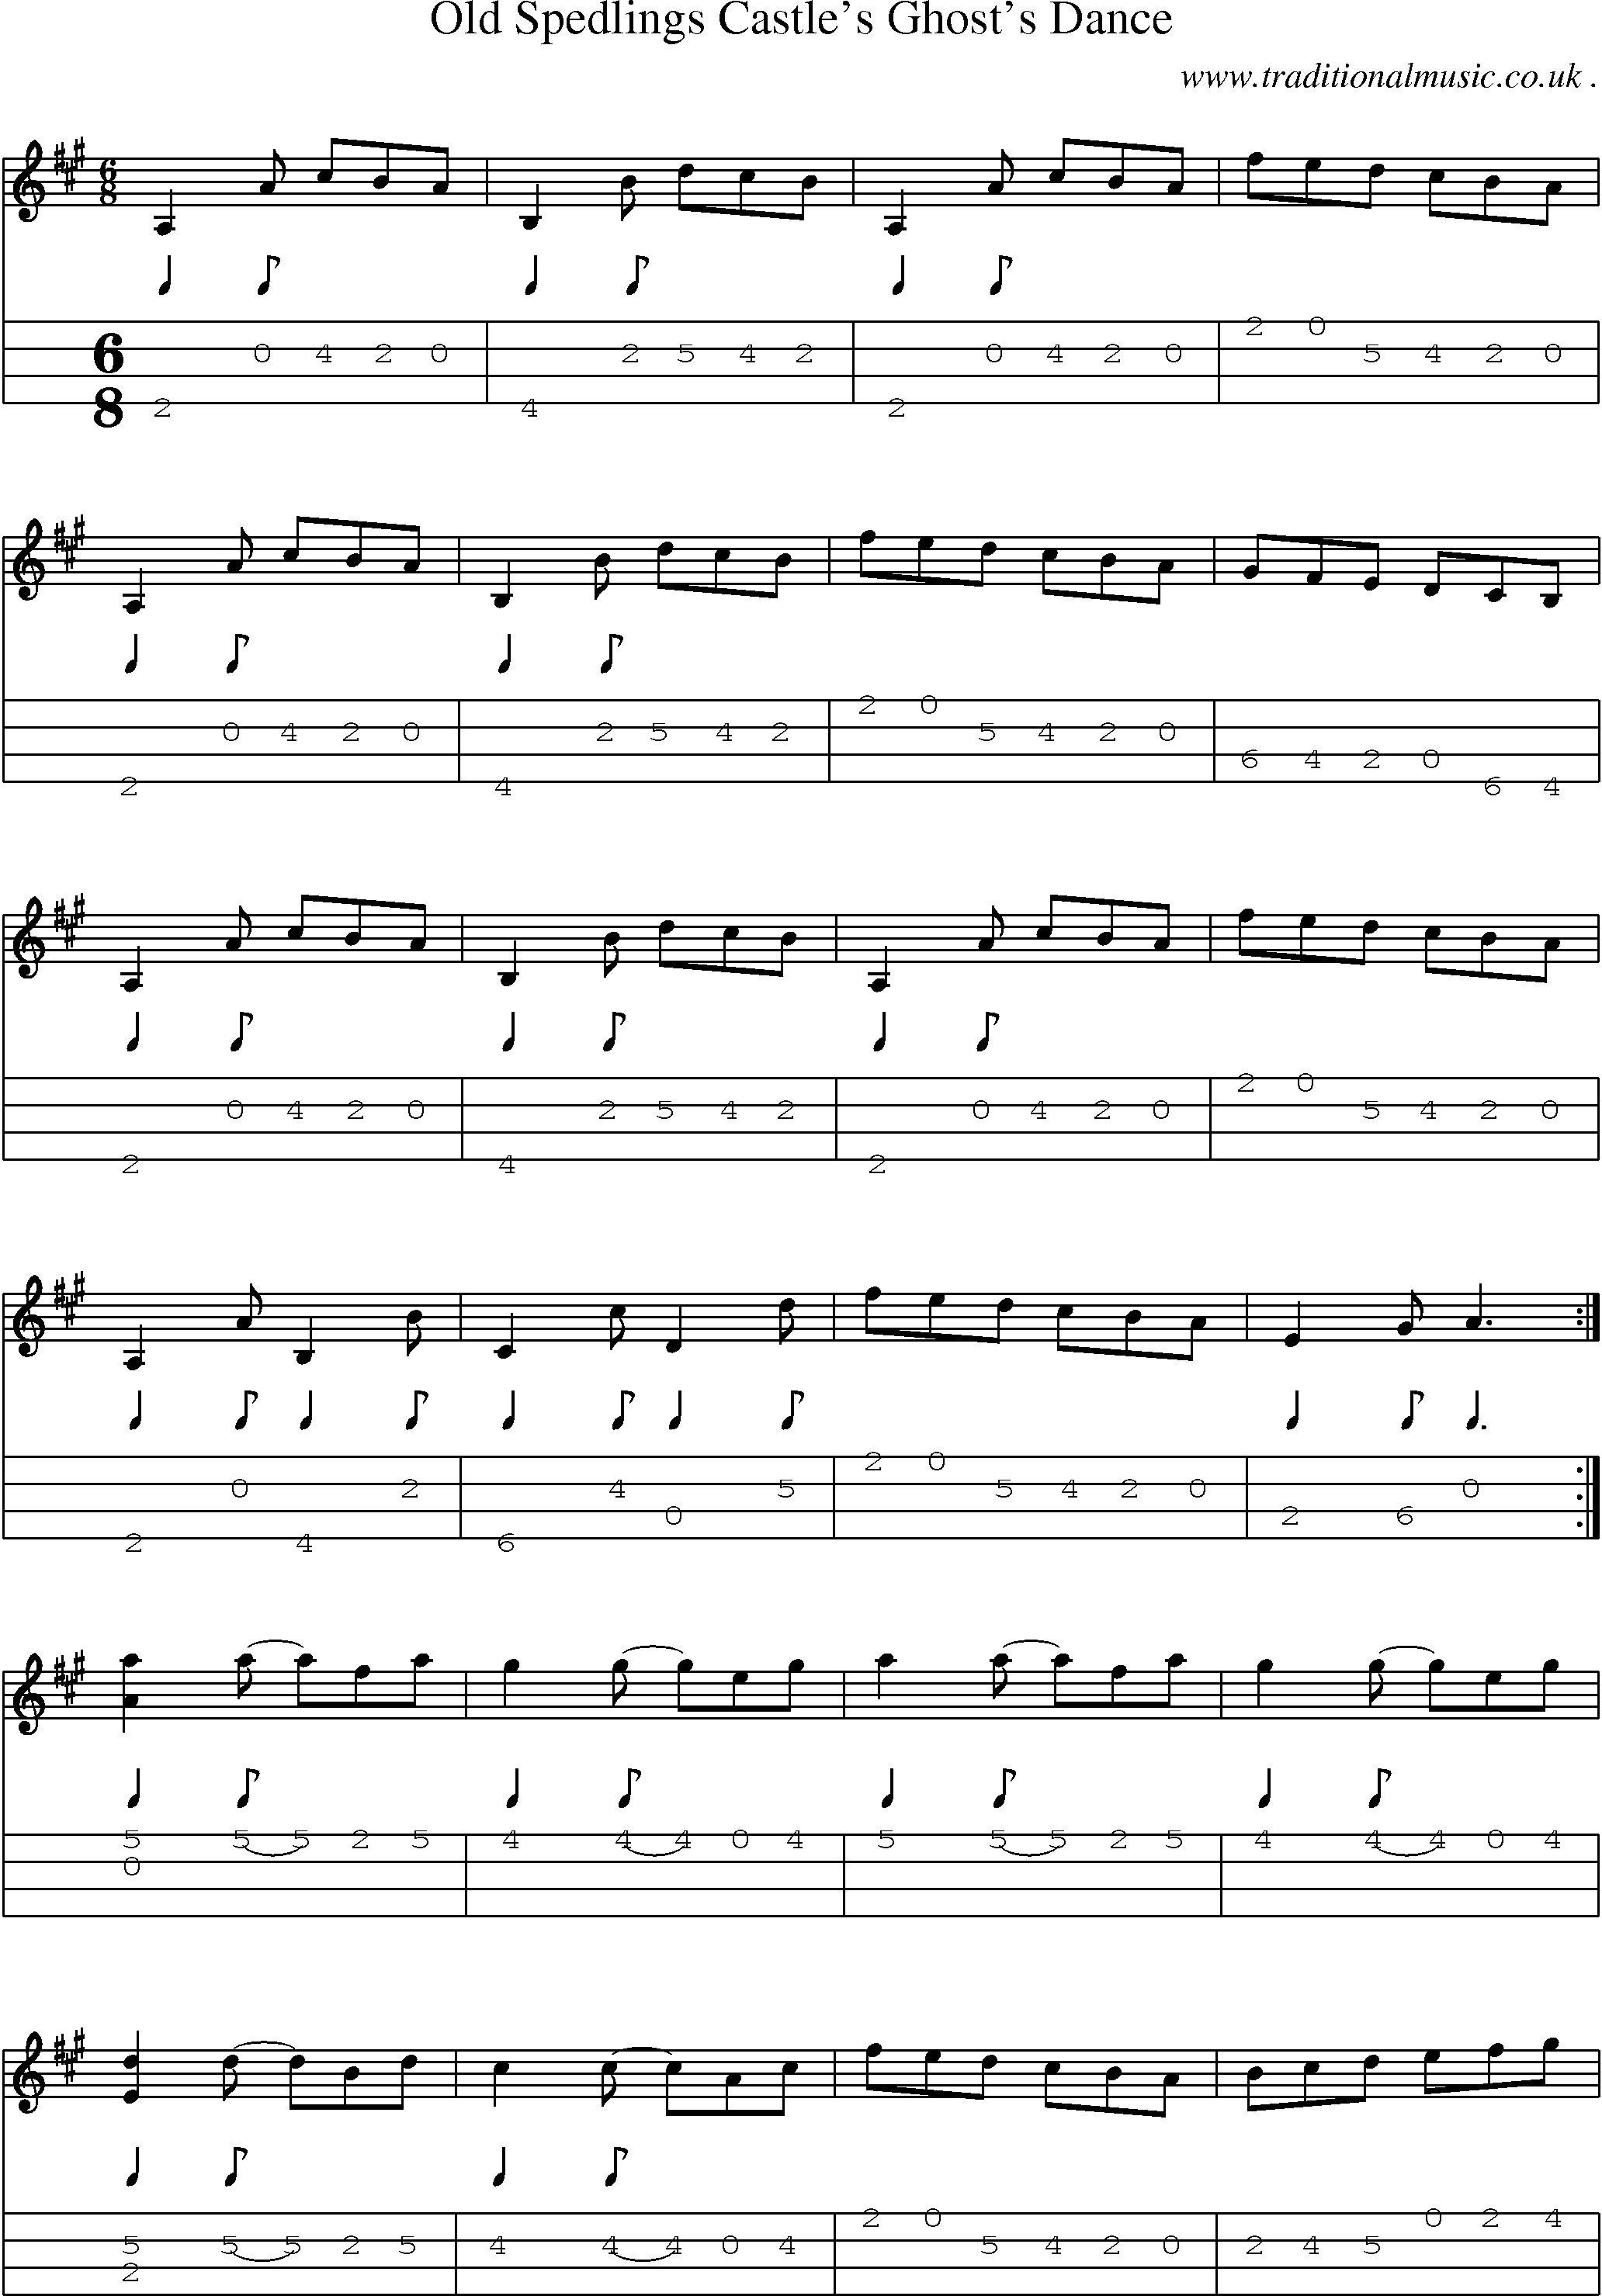 Sheet-Music and Mandolin Tabs for Old Spedlings Castles Ghosts Dance